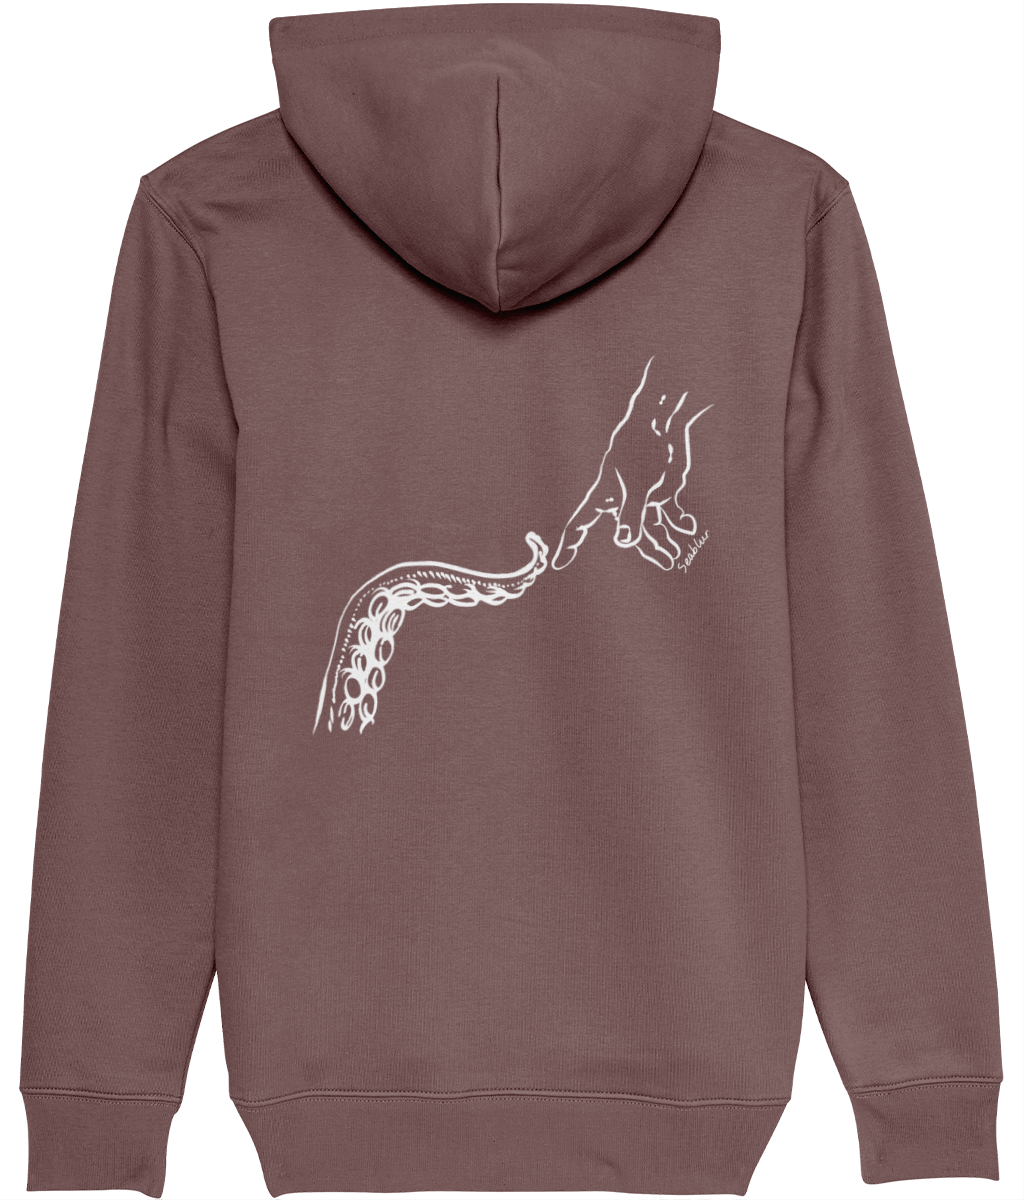 Mens - Octo and the Hand Hoodie